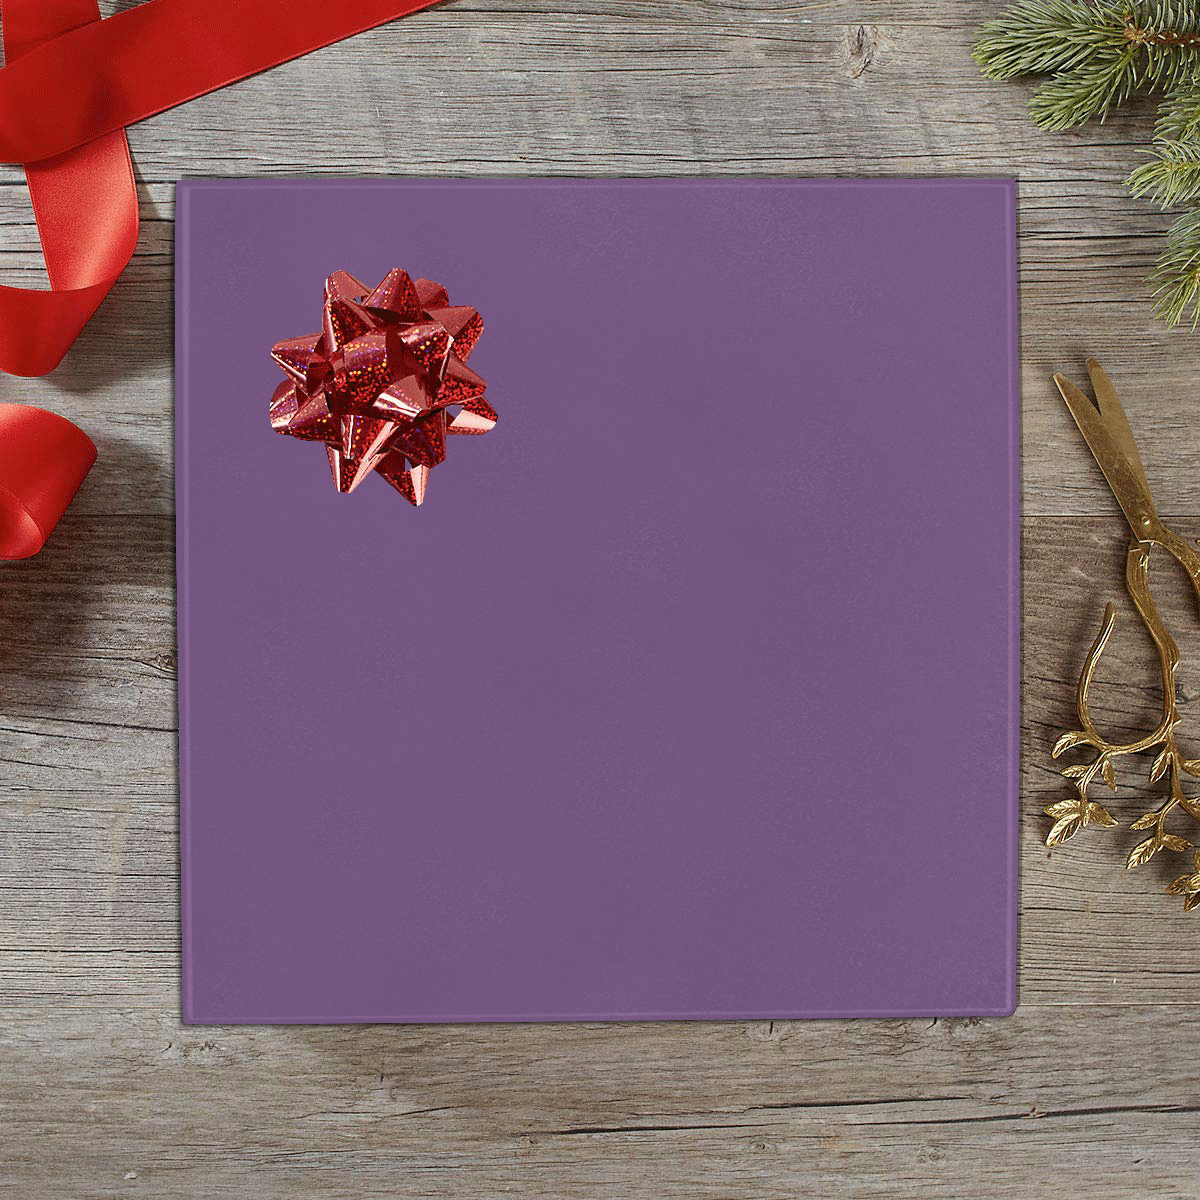 color purple 3515U Gift Wrapping Paper 58"x 23" (1 Roll)